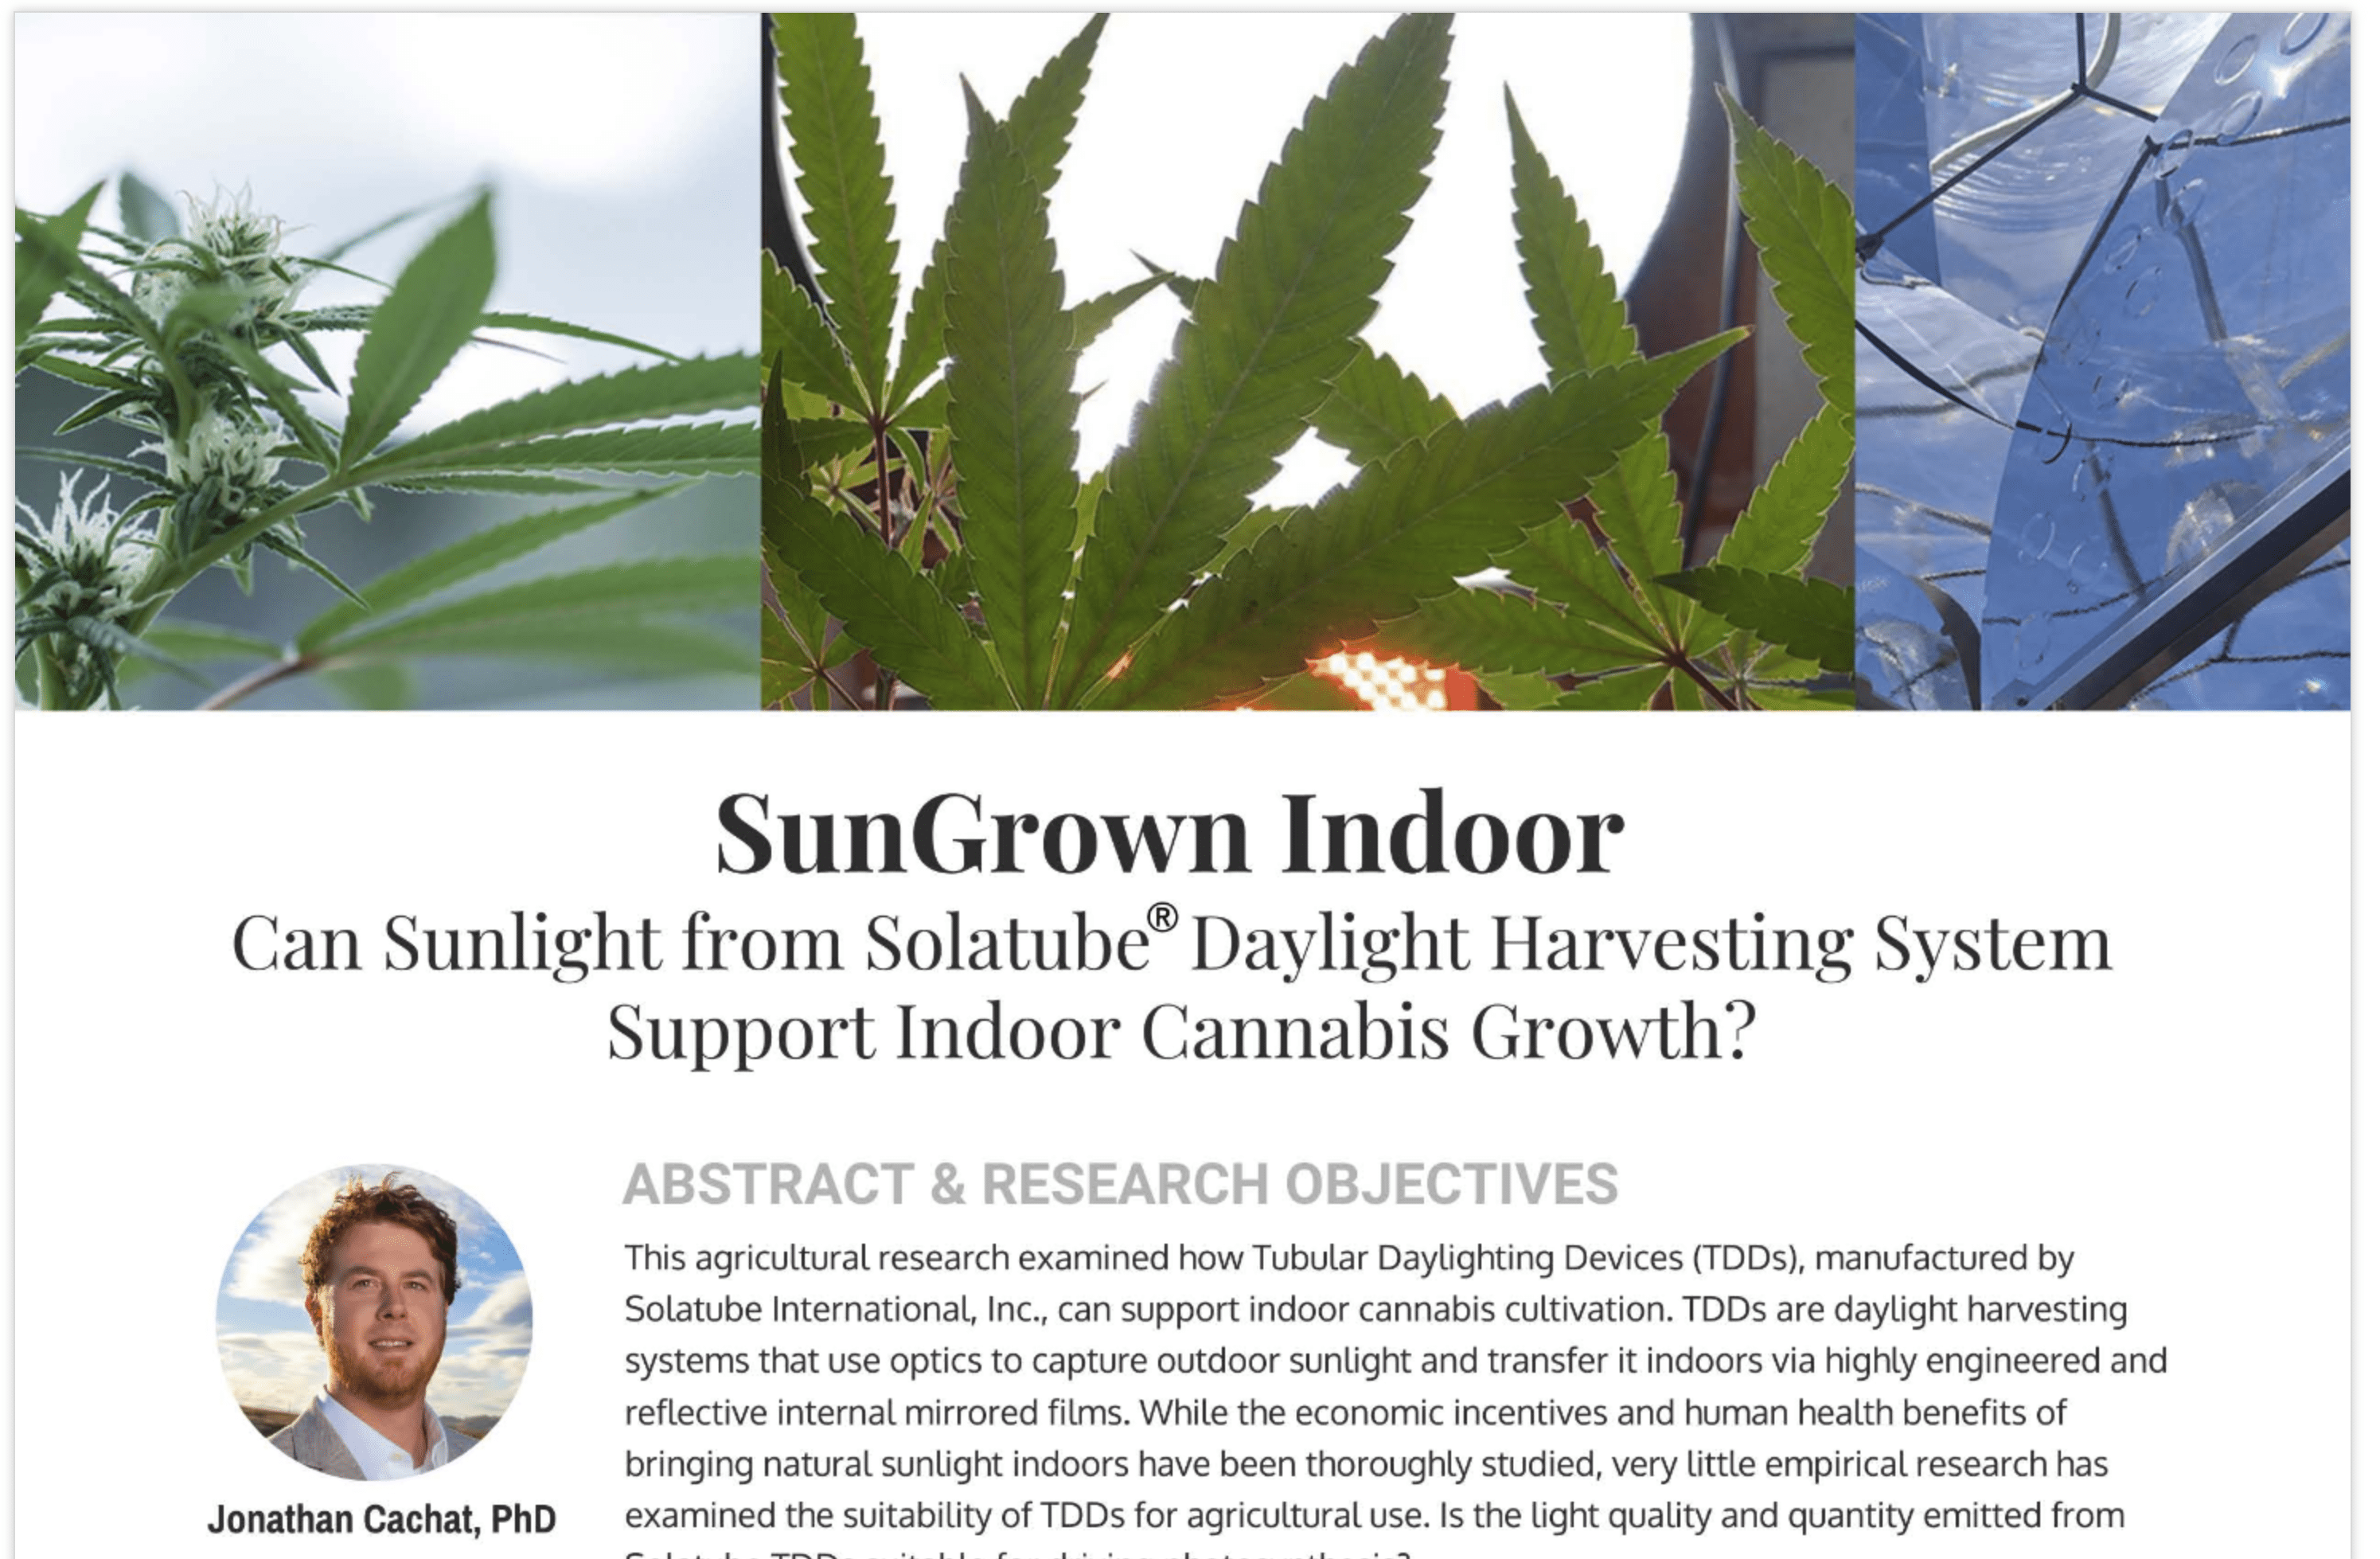 SunGrown Indoor: Can Sunlight from Solatube Daylight Harvesting Systems Support Indoor Cannabis Growth?